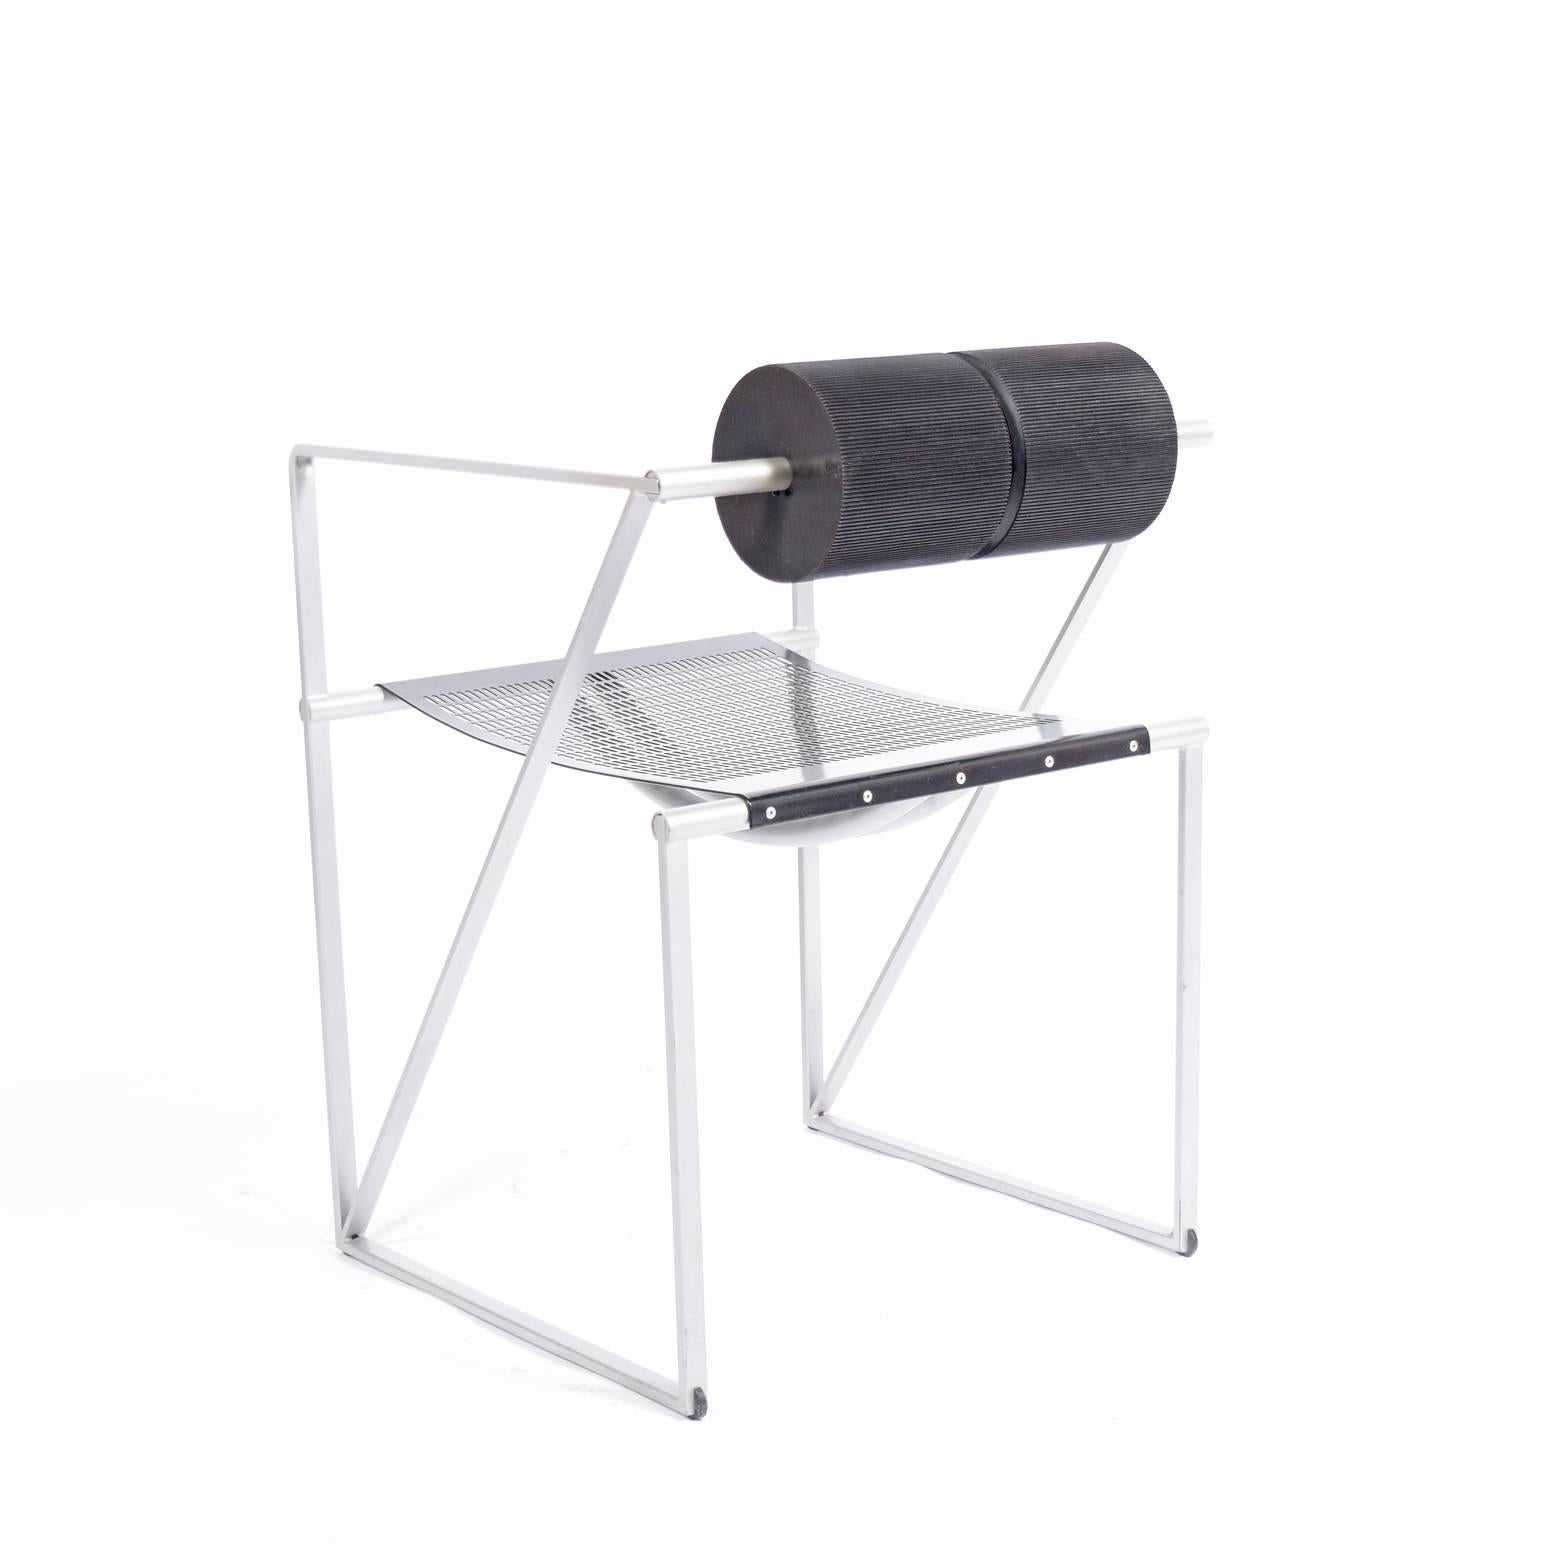 Early production armchair designed in 1982. Features silver epoxy finished frame, black enamore perforated sheet steel seat and back with charcoal colored polyurethane foam.